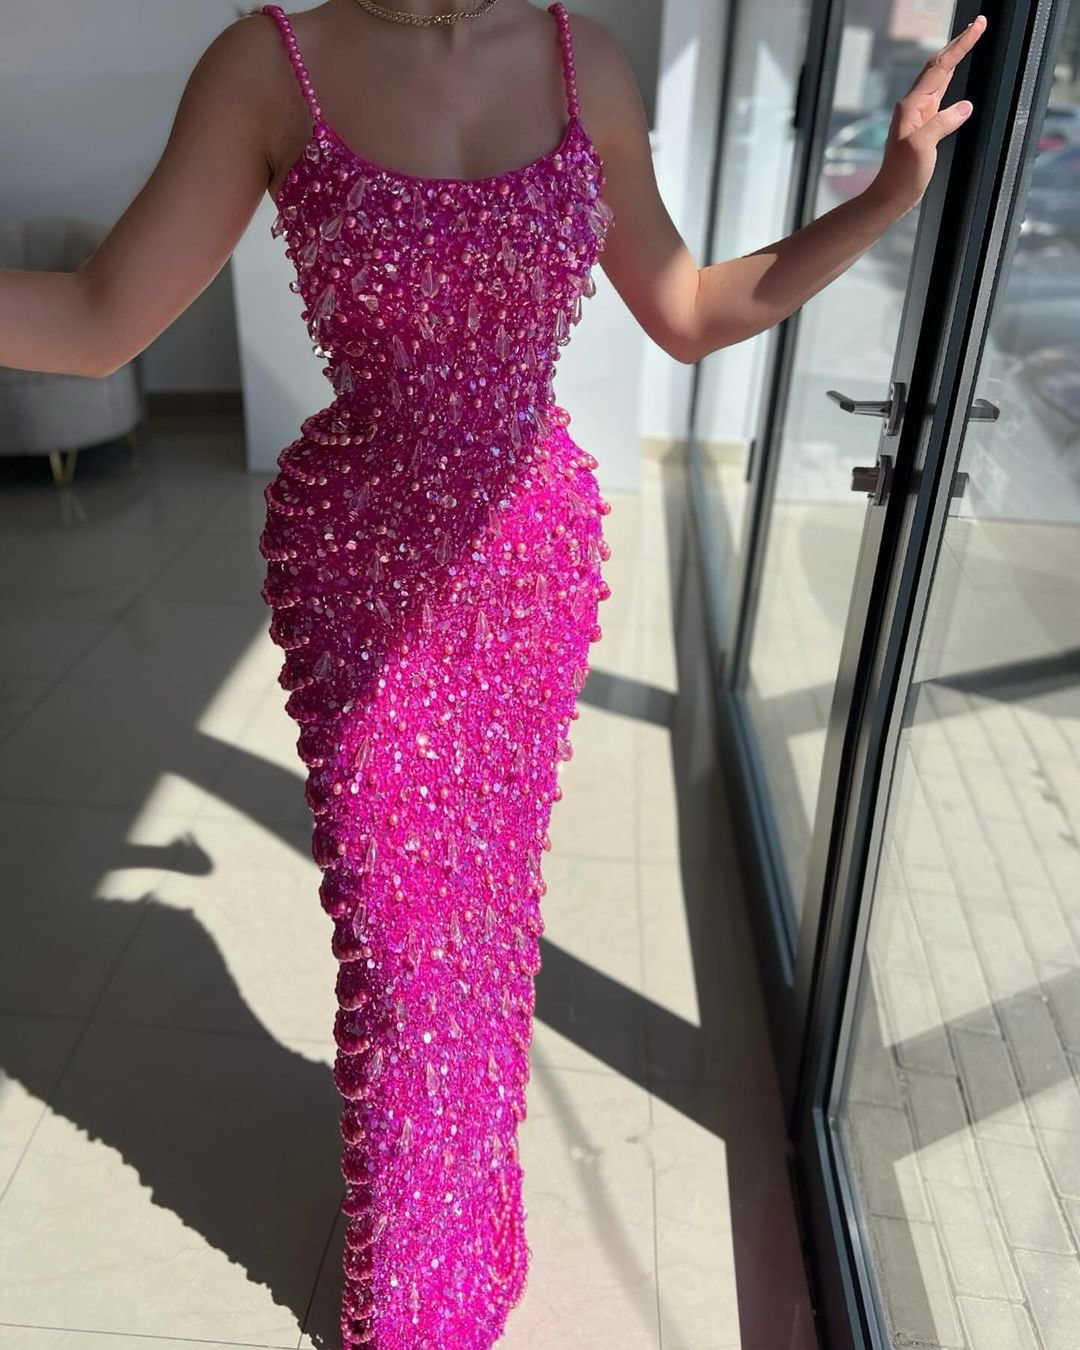 Fuchsia Acrylic Spaghetti-Straps Close-Fitting Mermaid Prom Dress With Pearls Sequins ZT0010